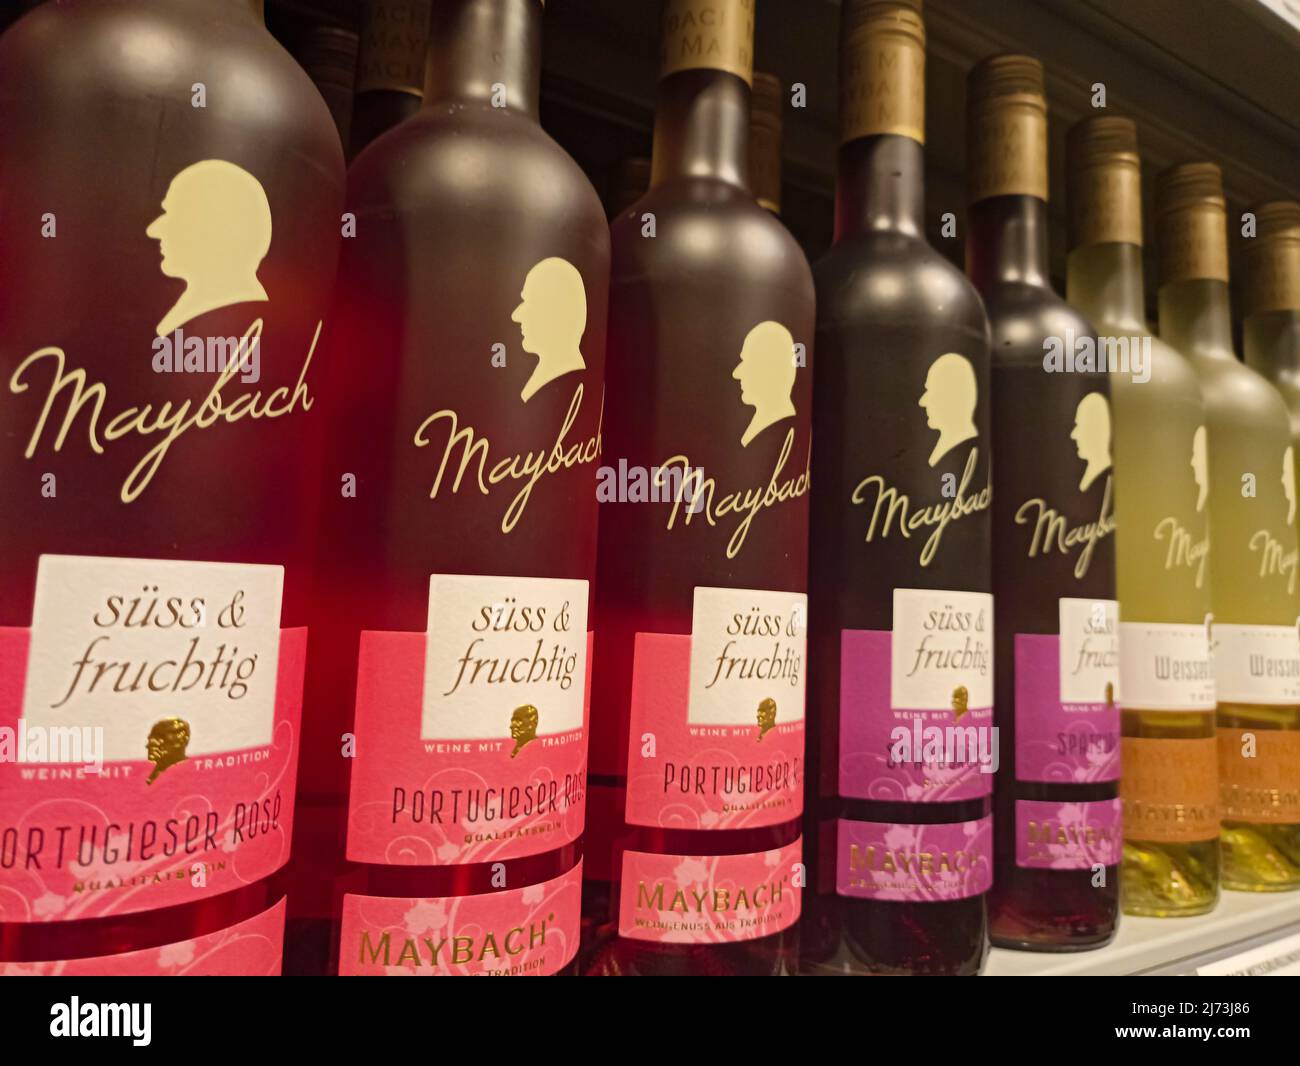 Bottles of Maybach Portuguese rose sweet and fruity wine in the Rewe supermarket Stock Photo